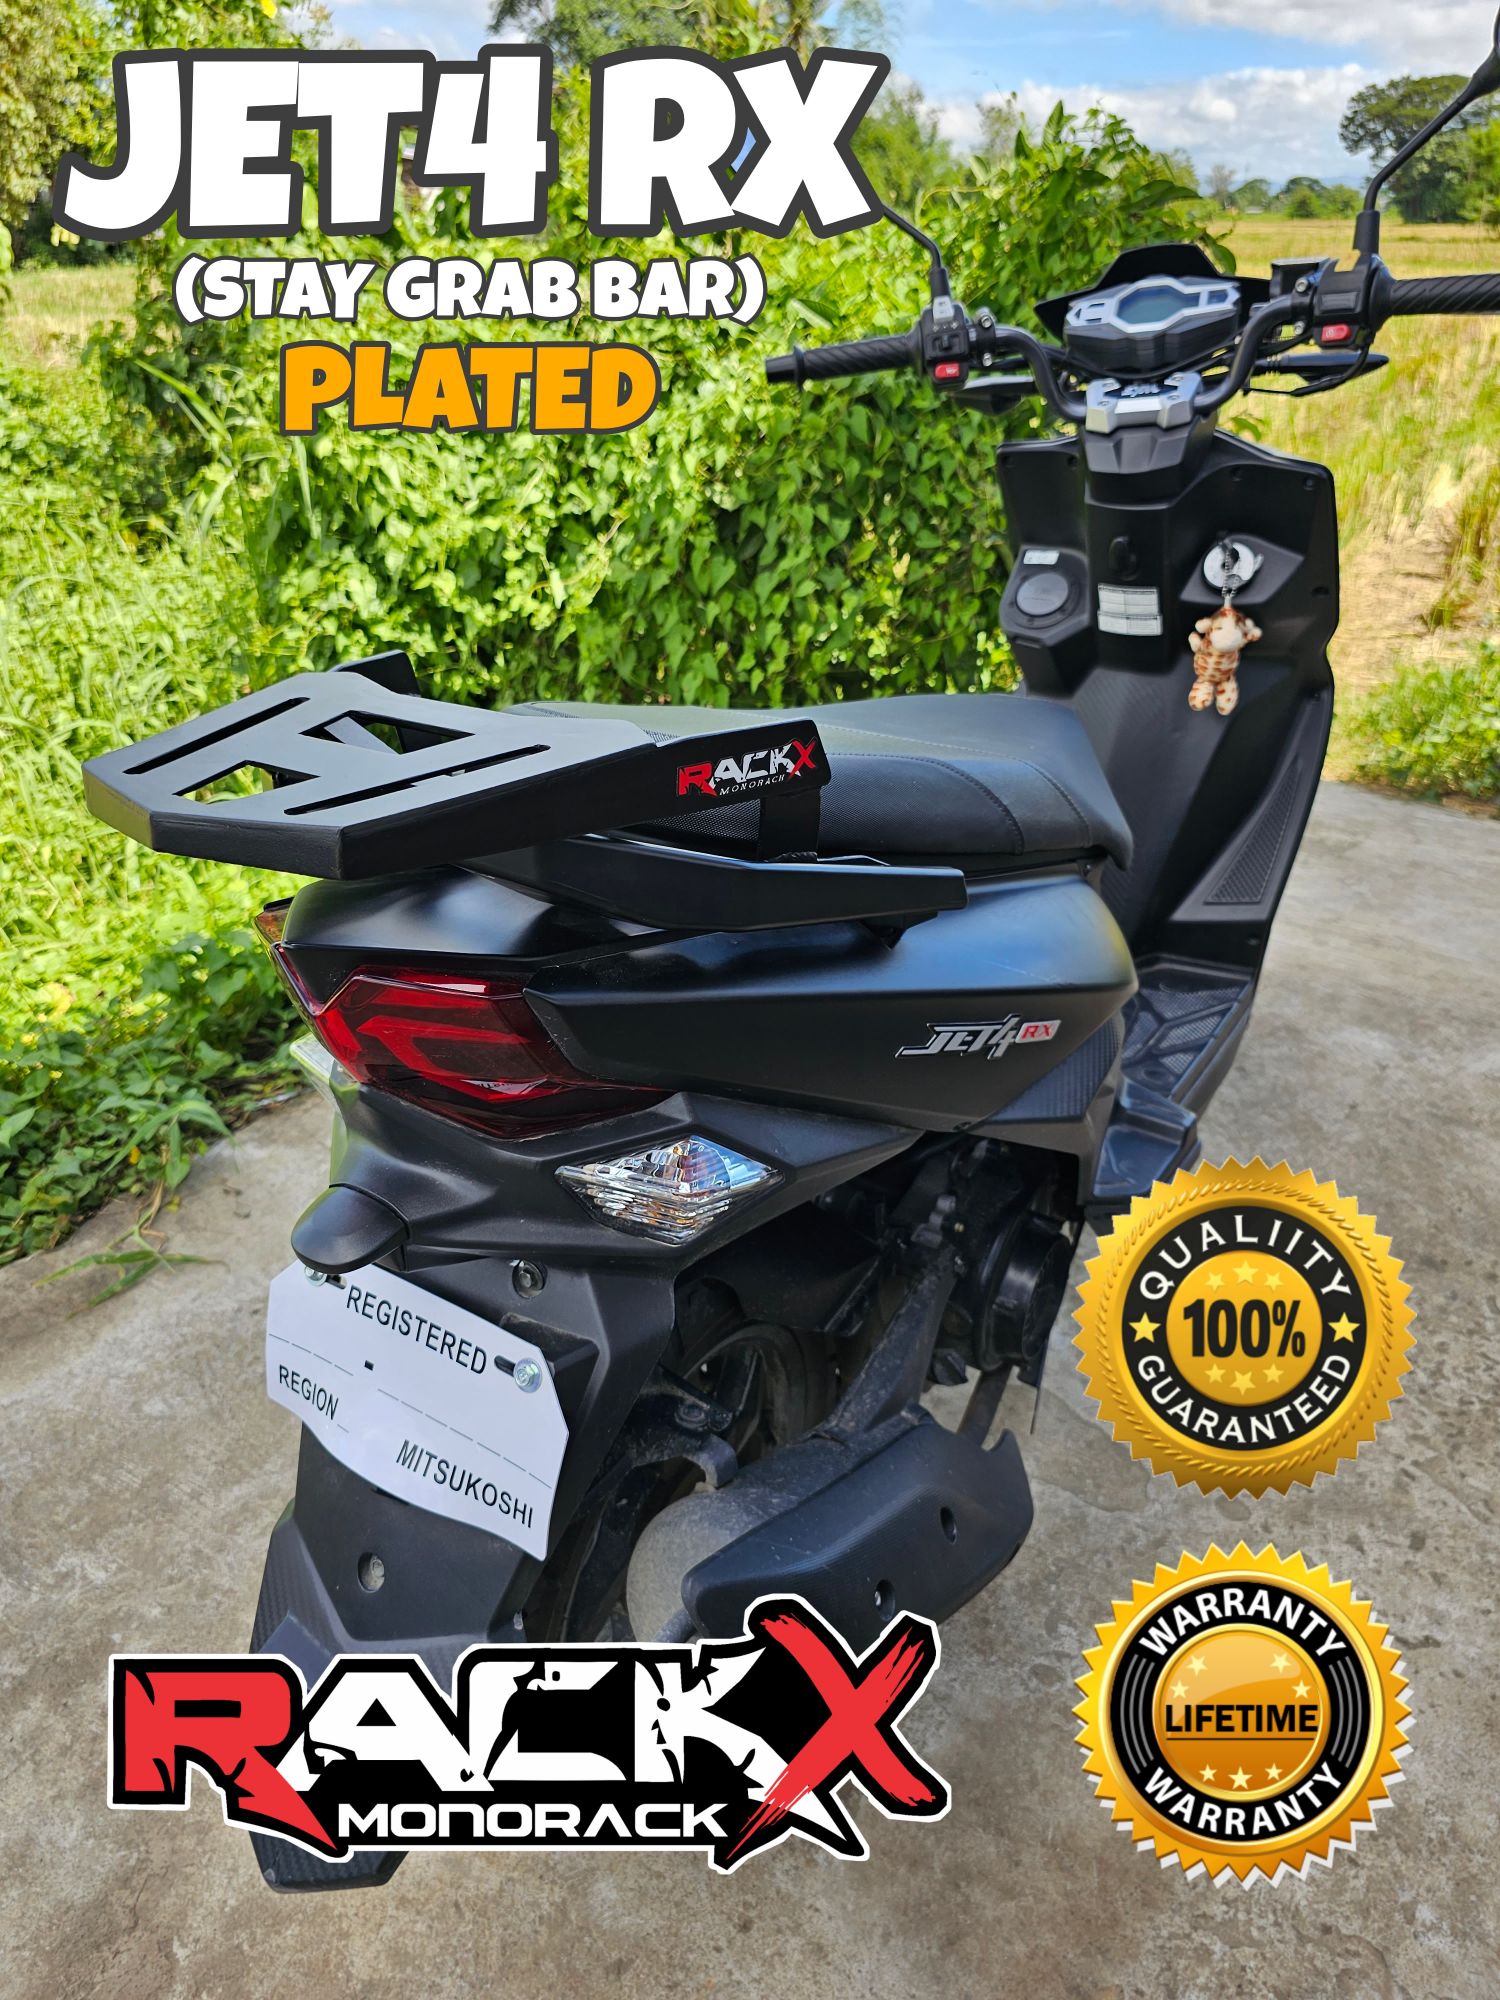 RACK X MONORACK FOR MIO GEAR 125 (STAY GRAB BAR)